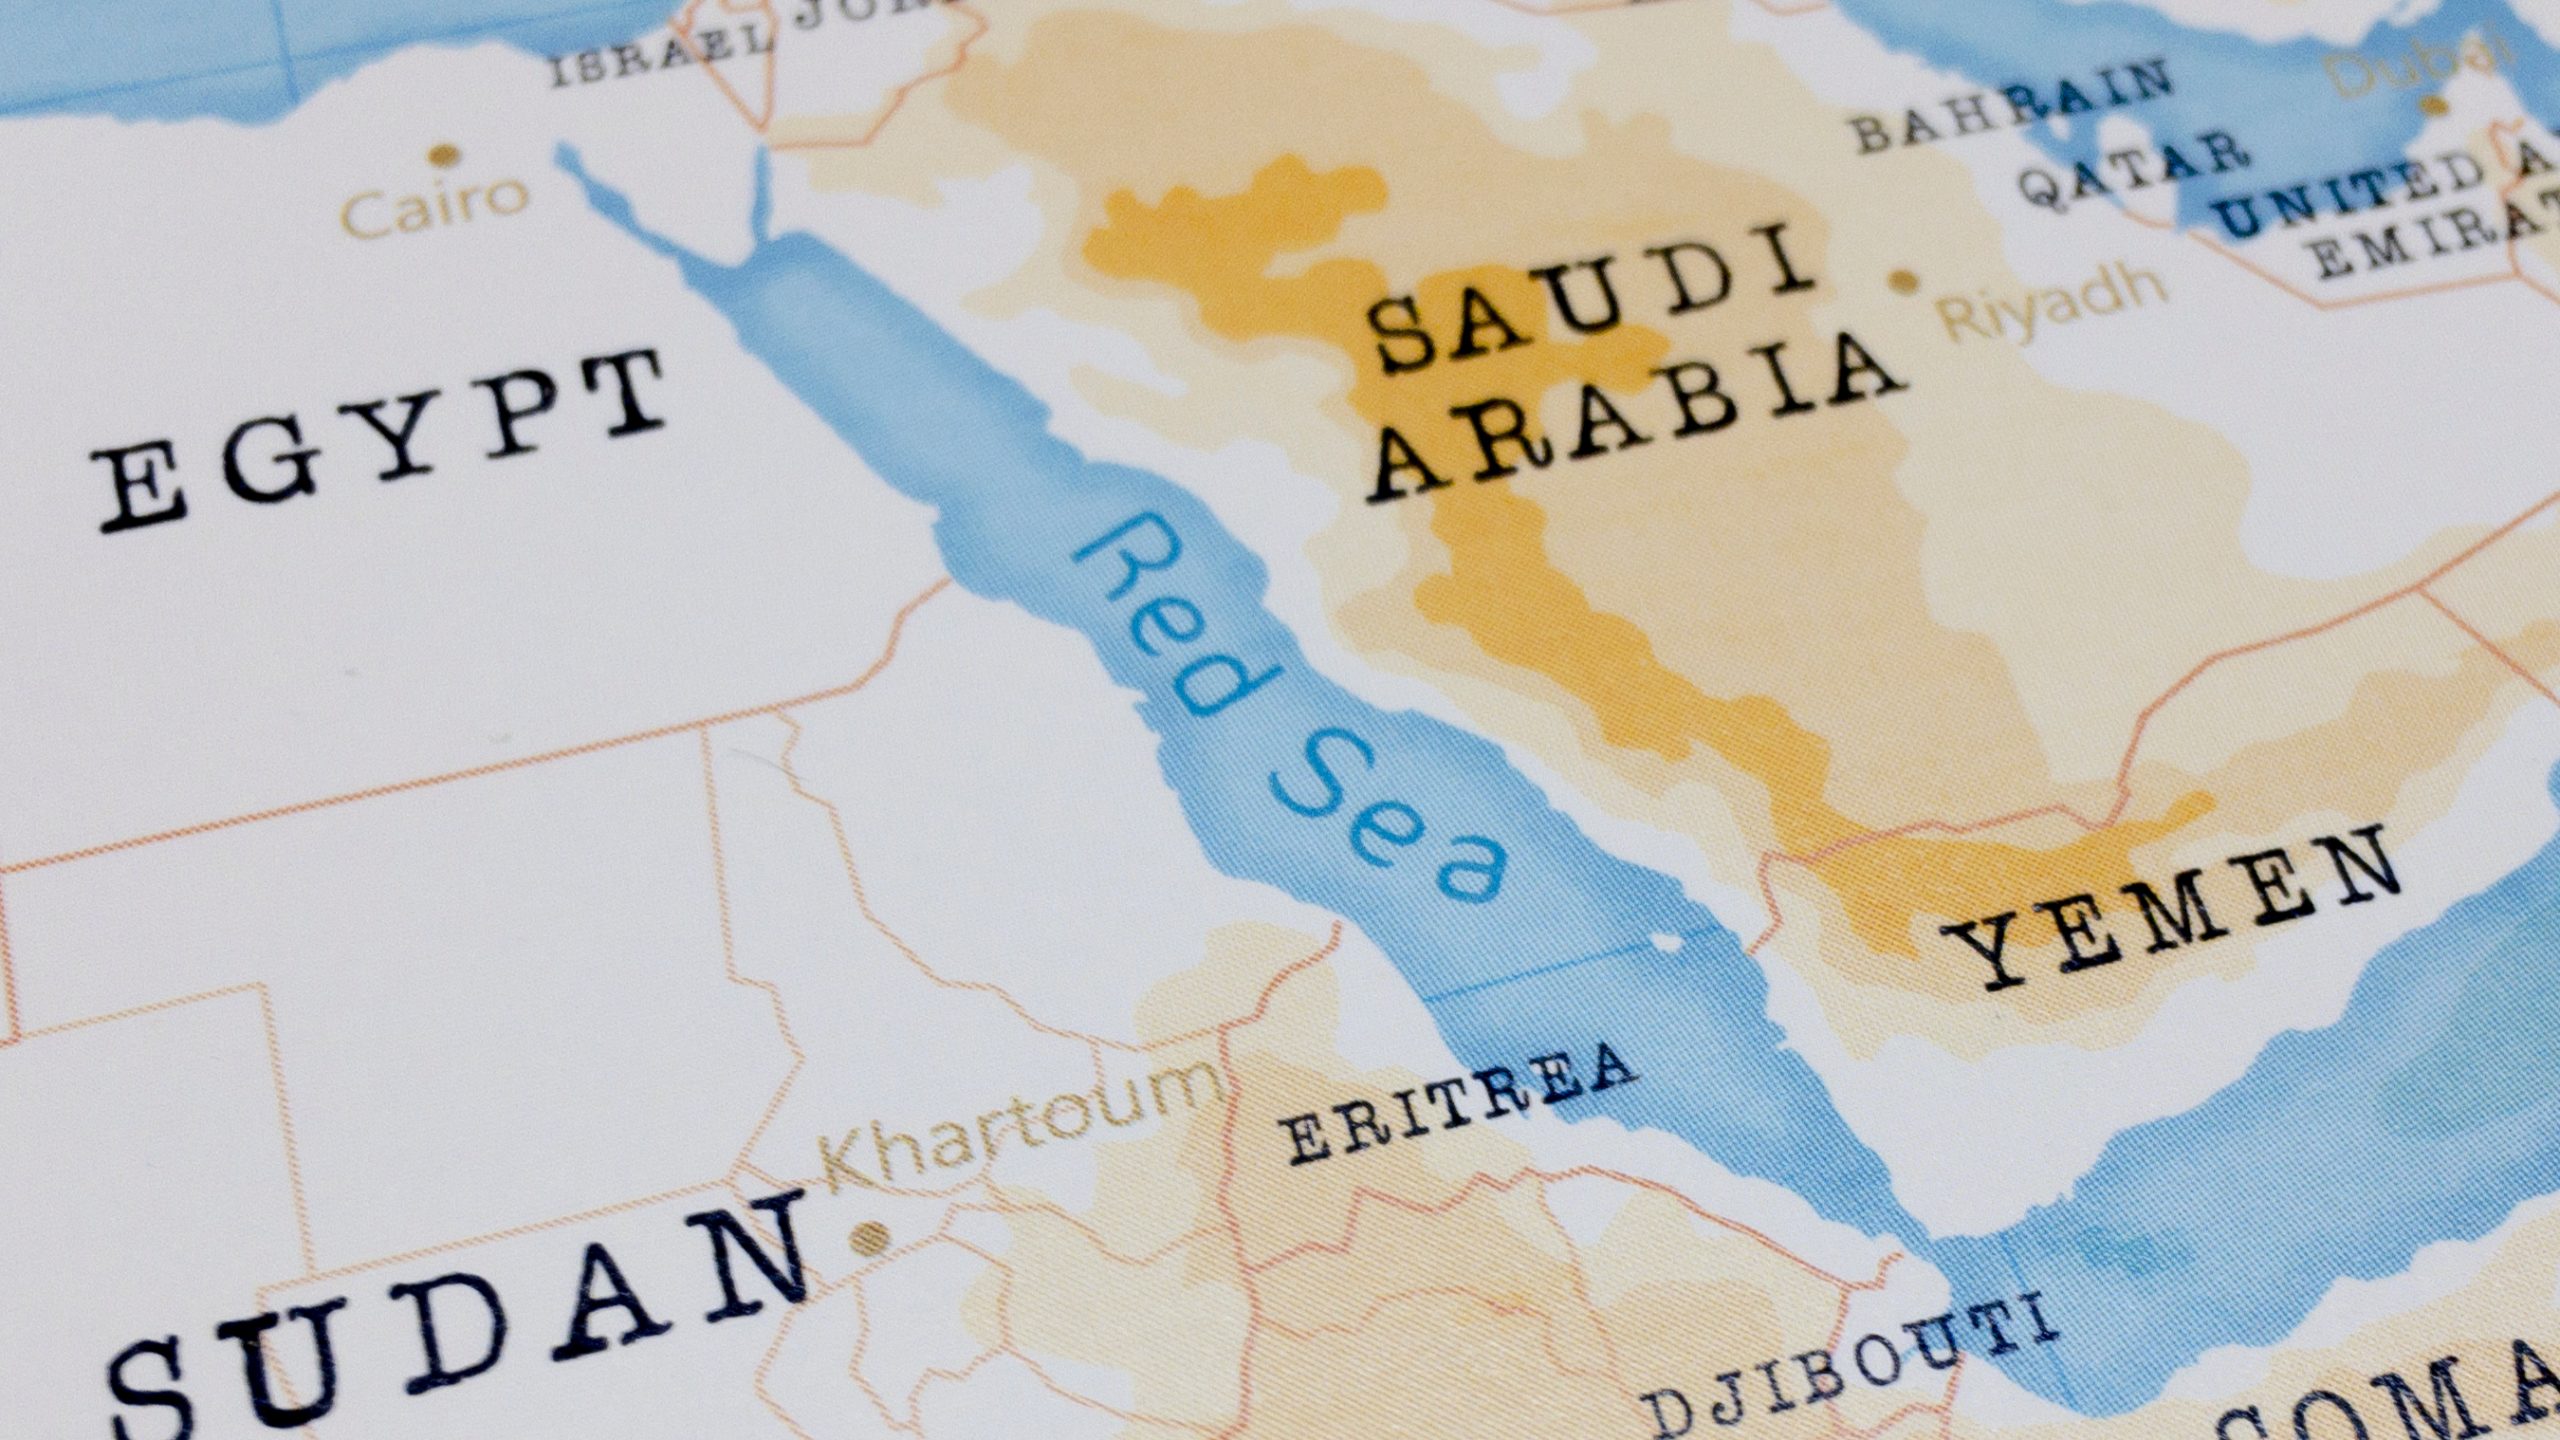 Supply Chain Disruption Possible Due to Red Sea Attacks